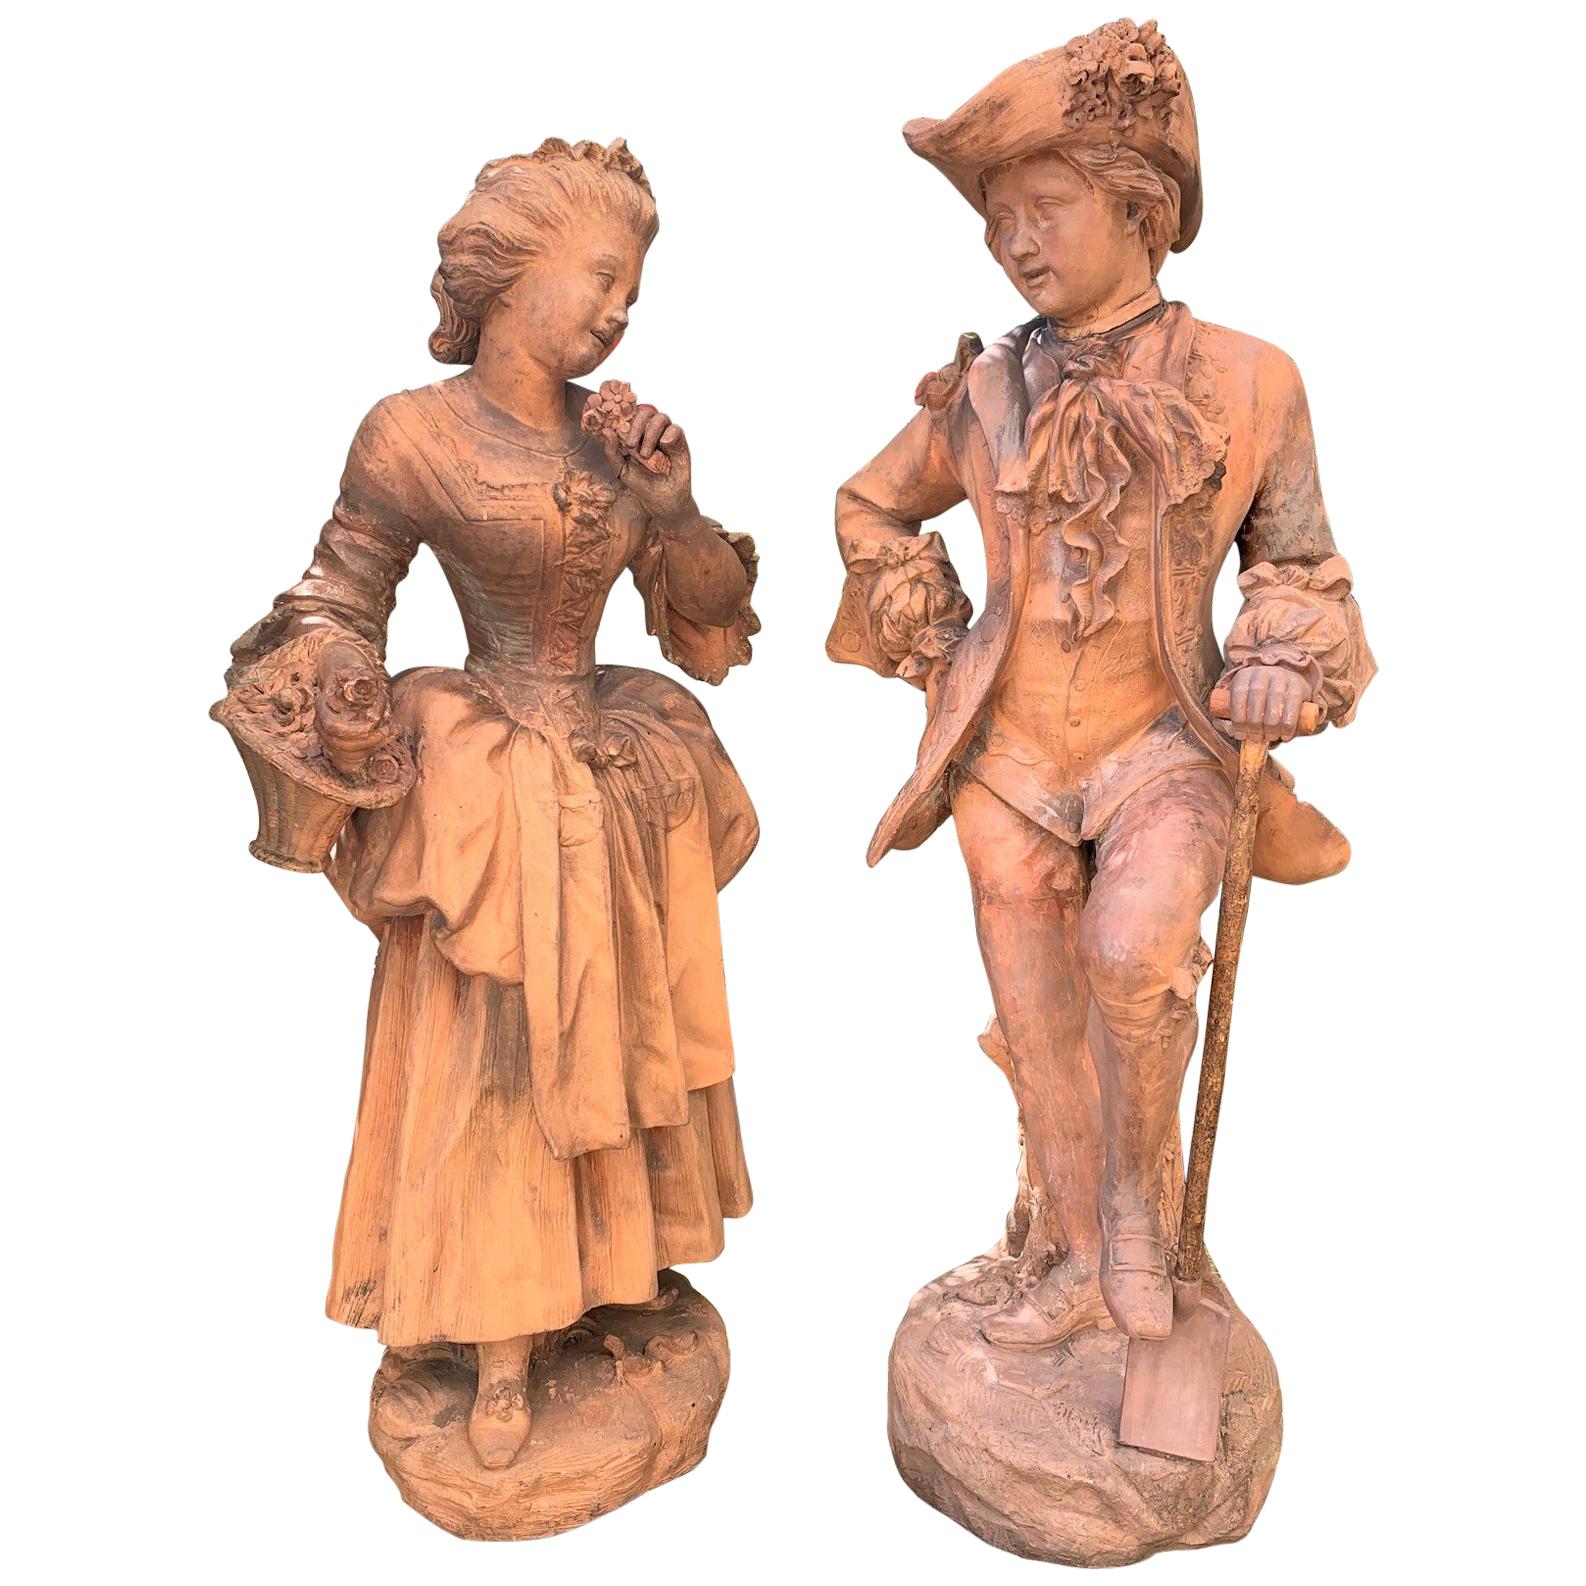 18th Century French Terracotta Figurative Sculptures, Pair